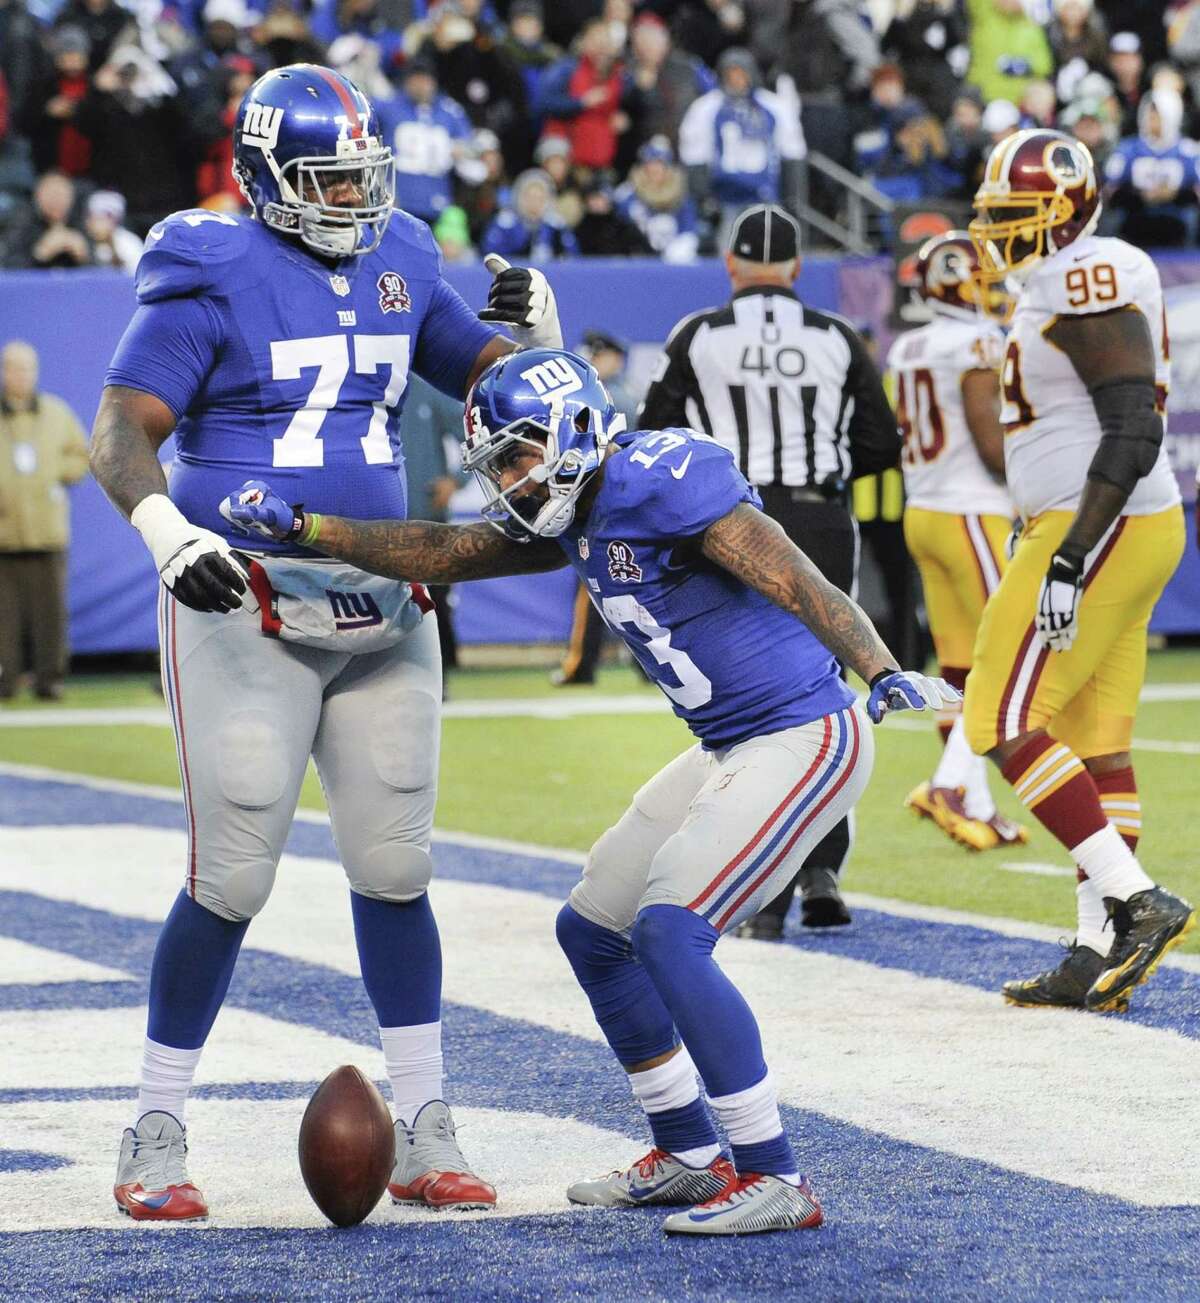 Giants wide receiver Odell Beckham Jr. will face a stiff test Sunday against the St. Louis Rams defense.